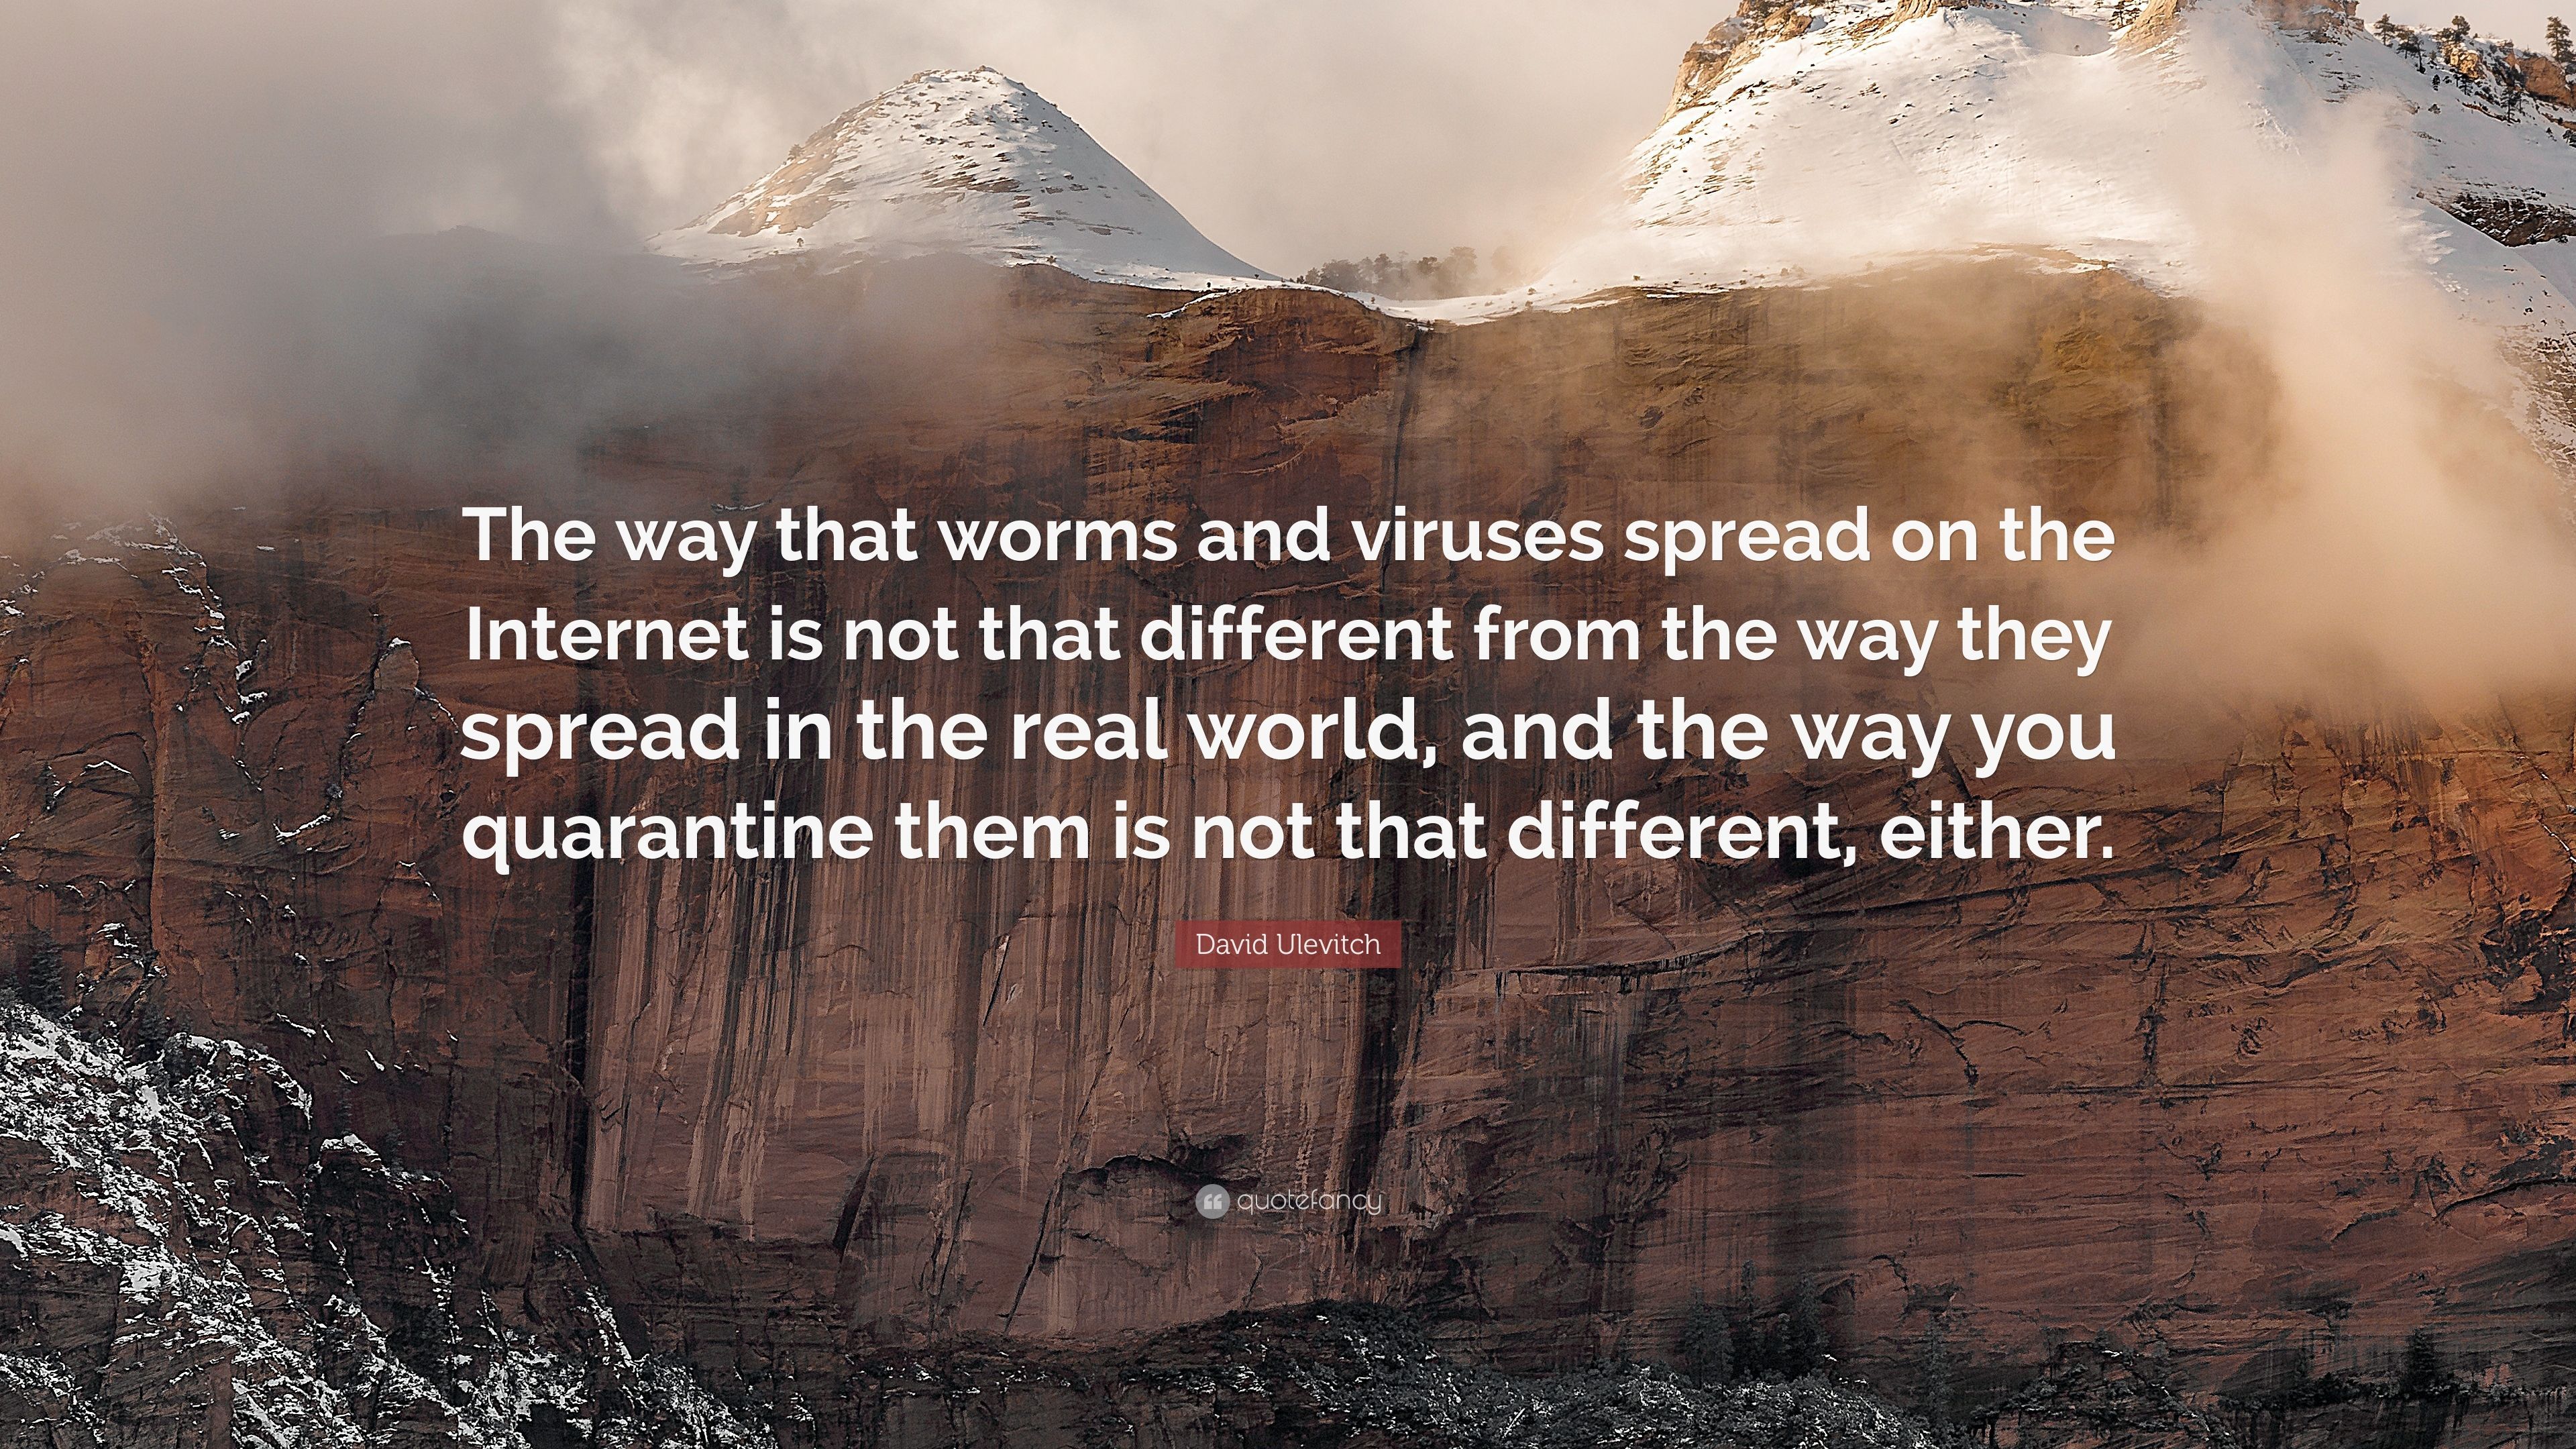 David Ulevitch Quote: “The way that worms and viruses spread